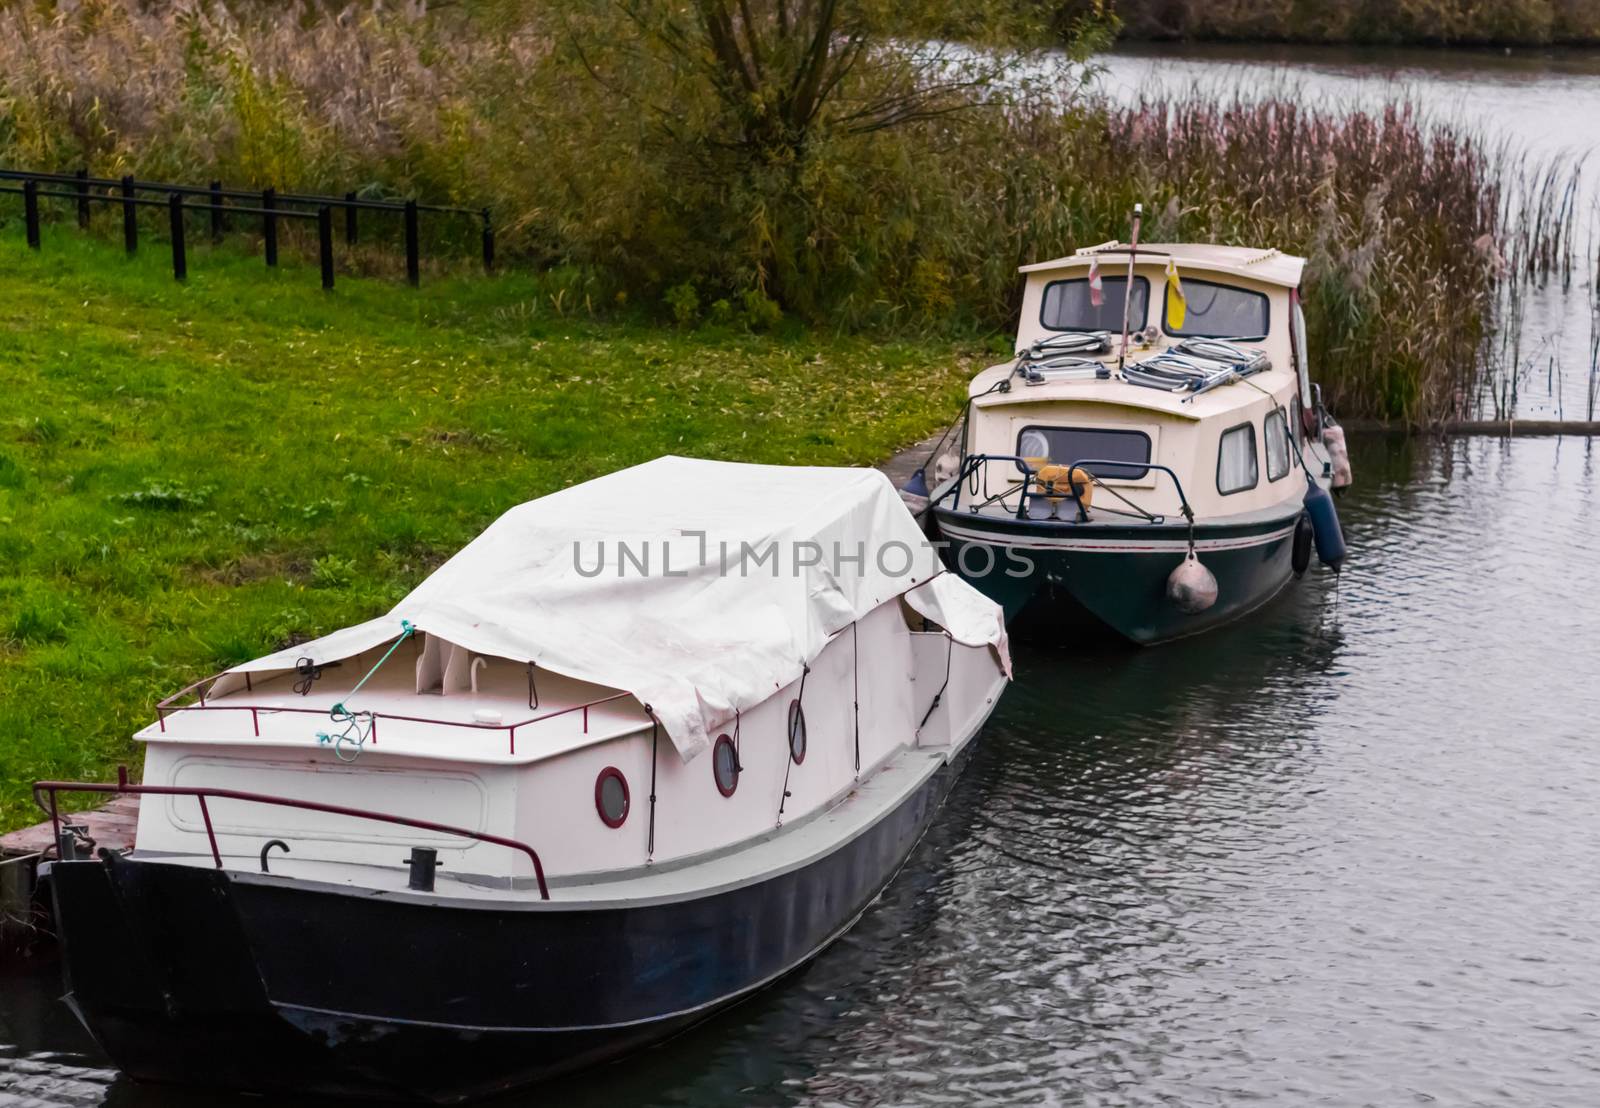 two typical dutch boats docked on the water shore, one covered u by charlottebleijenberg